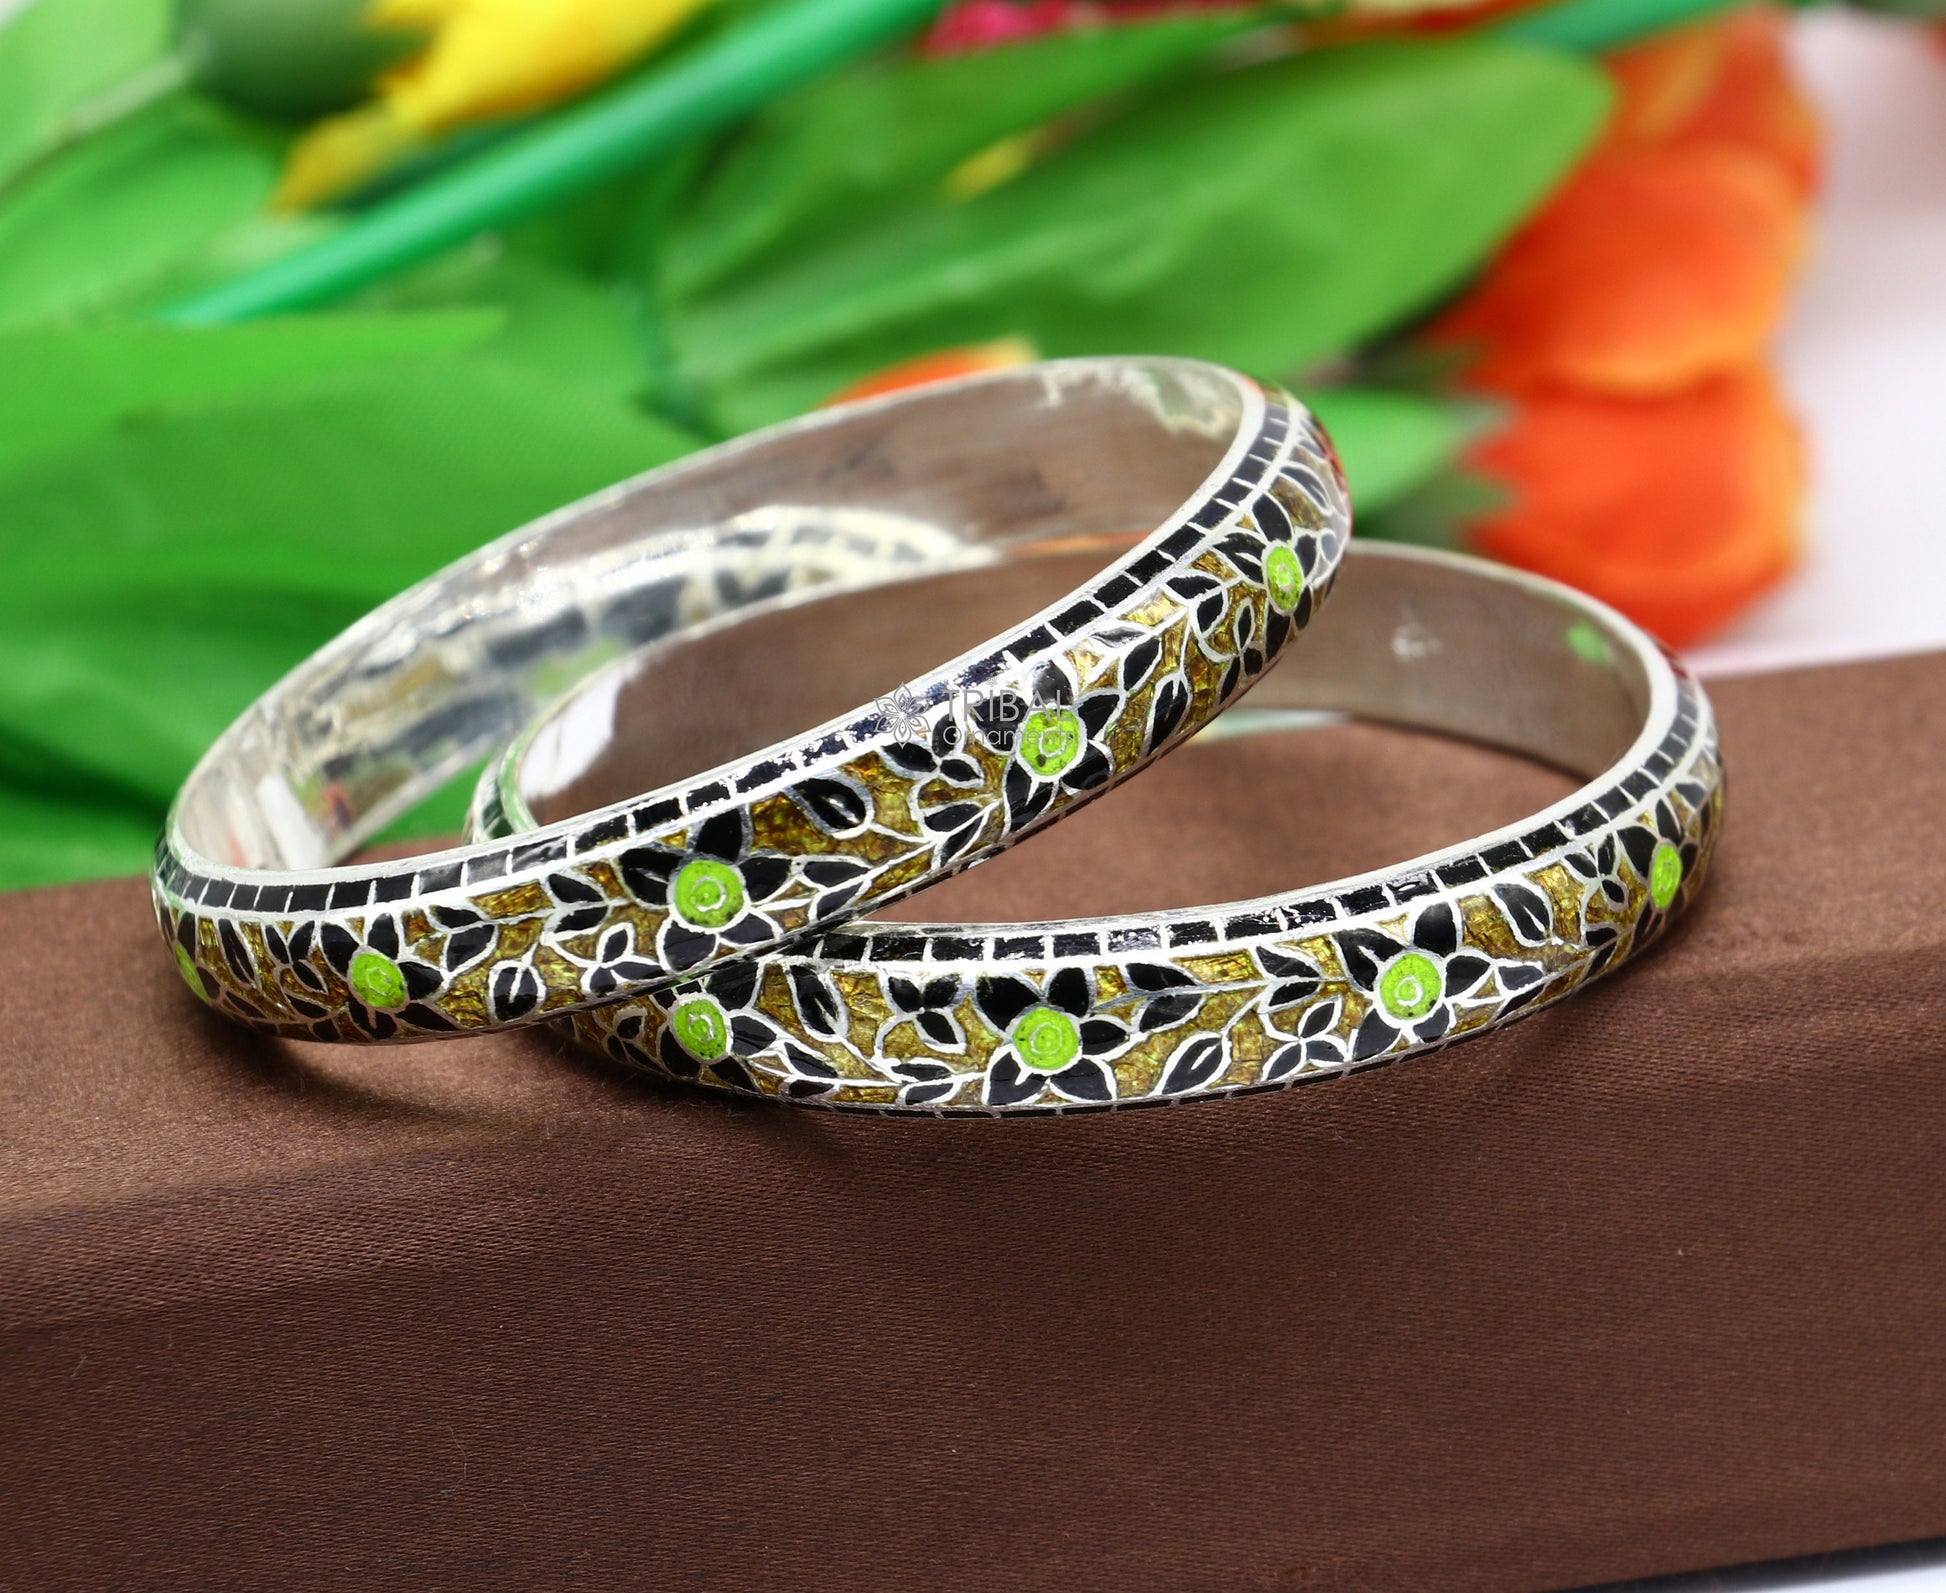 925 Sterling silver Traditional cultural design meenakari (color enamel )bangles bracelet brides trendy style jewelry from india nba360 - TRIBAL ORNAMENTS